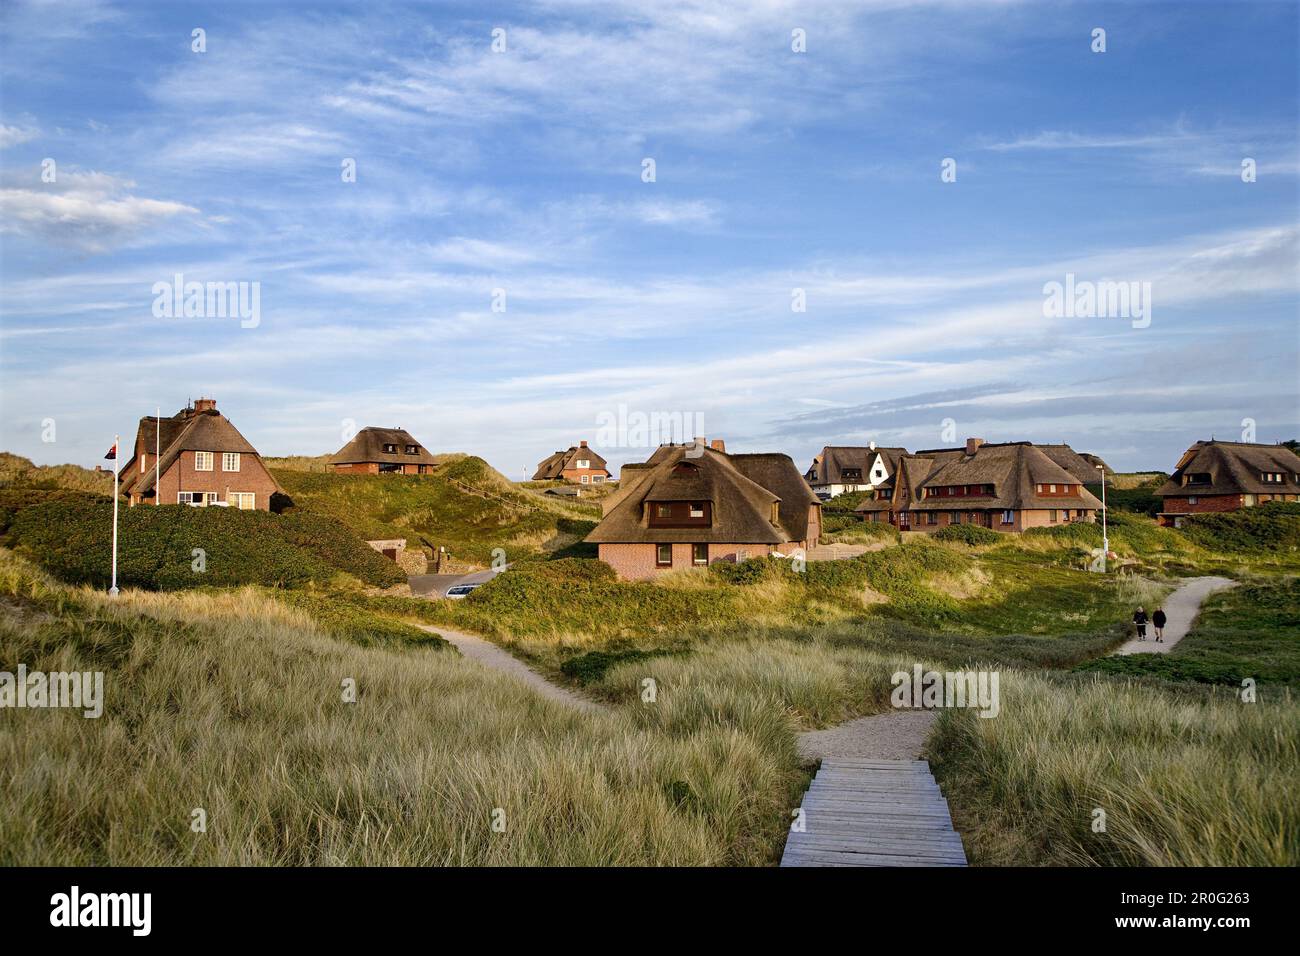 Thatched houses in dunes, Rantum, Sylt Island, Schleswig-Holstein, Germany Stock Photo